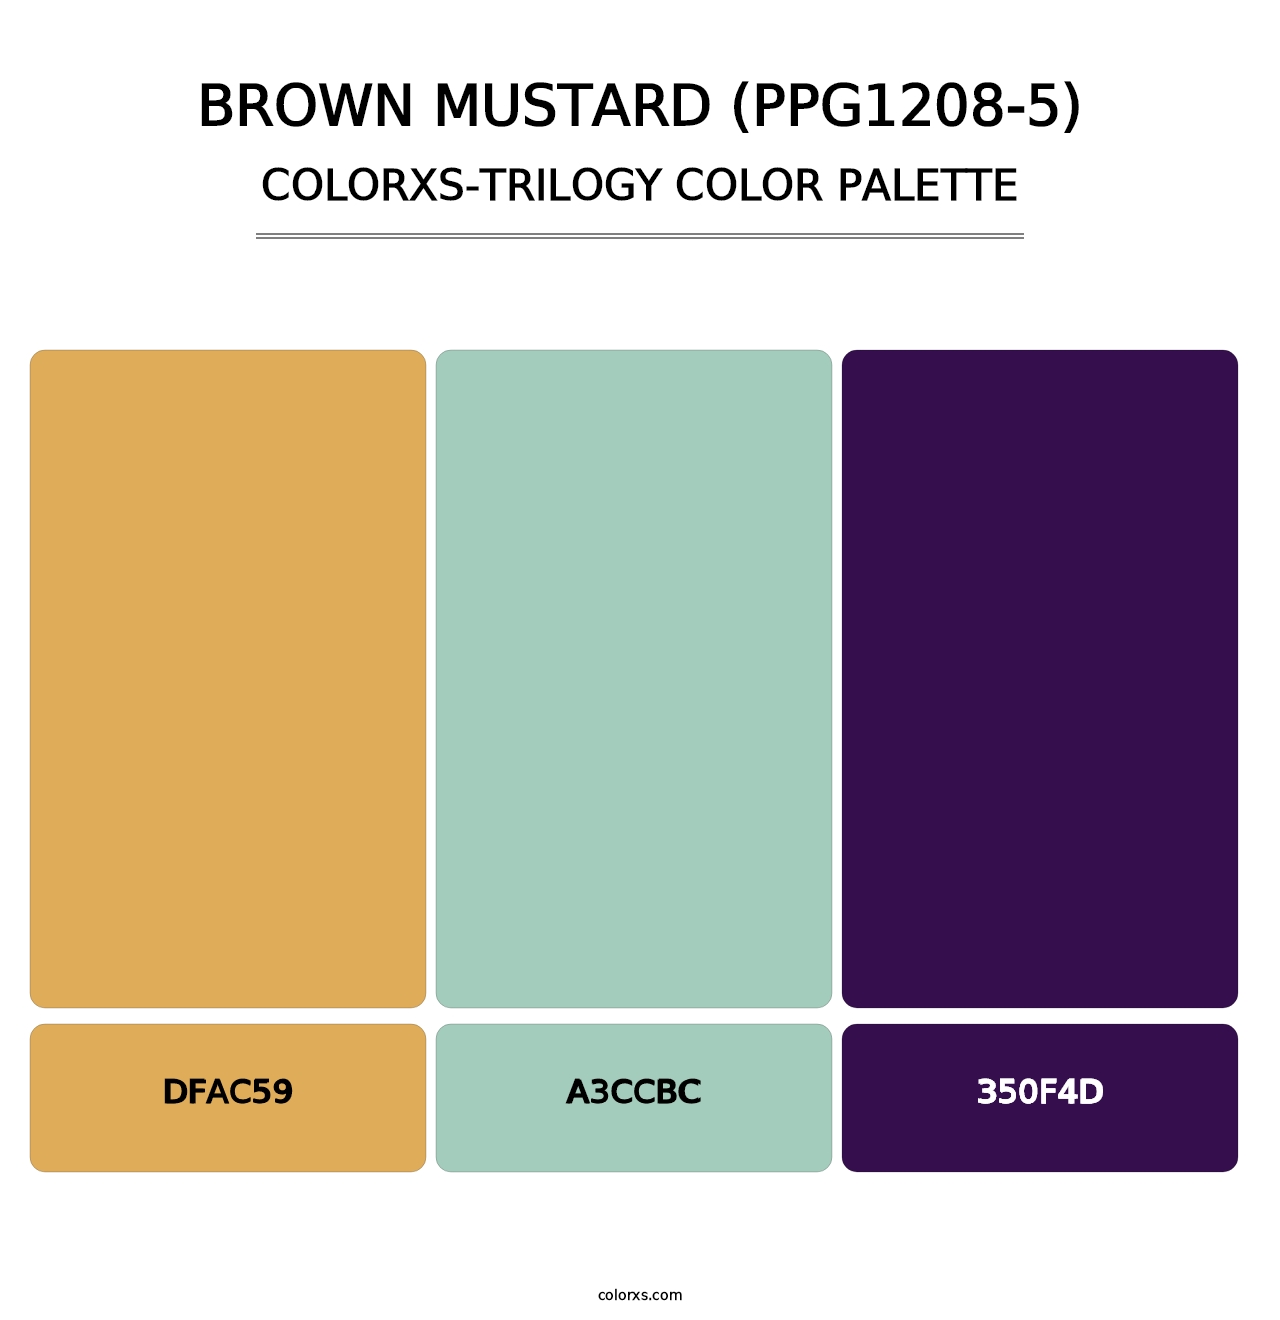 Brown Mustard (PPG1208-5) - Colorxs Trilogy Palette